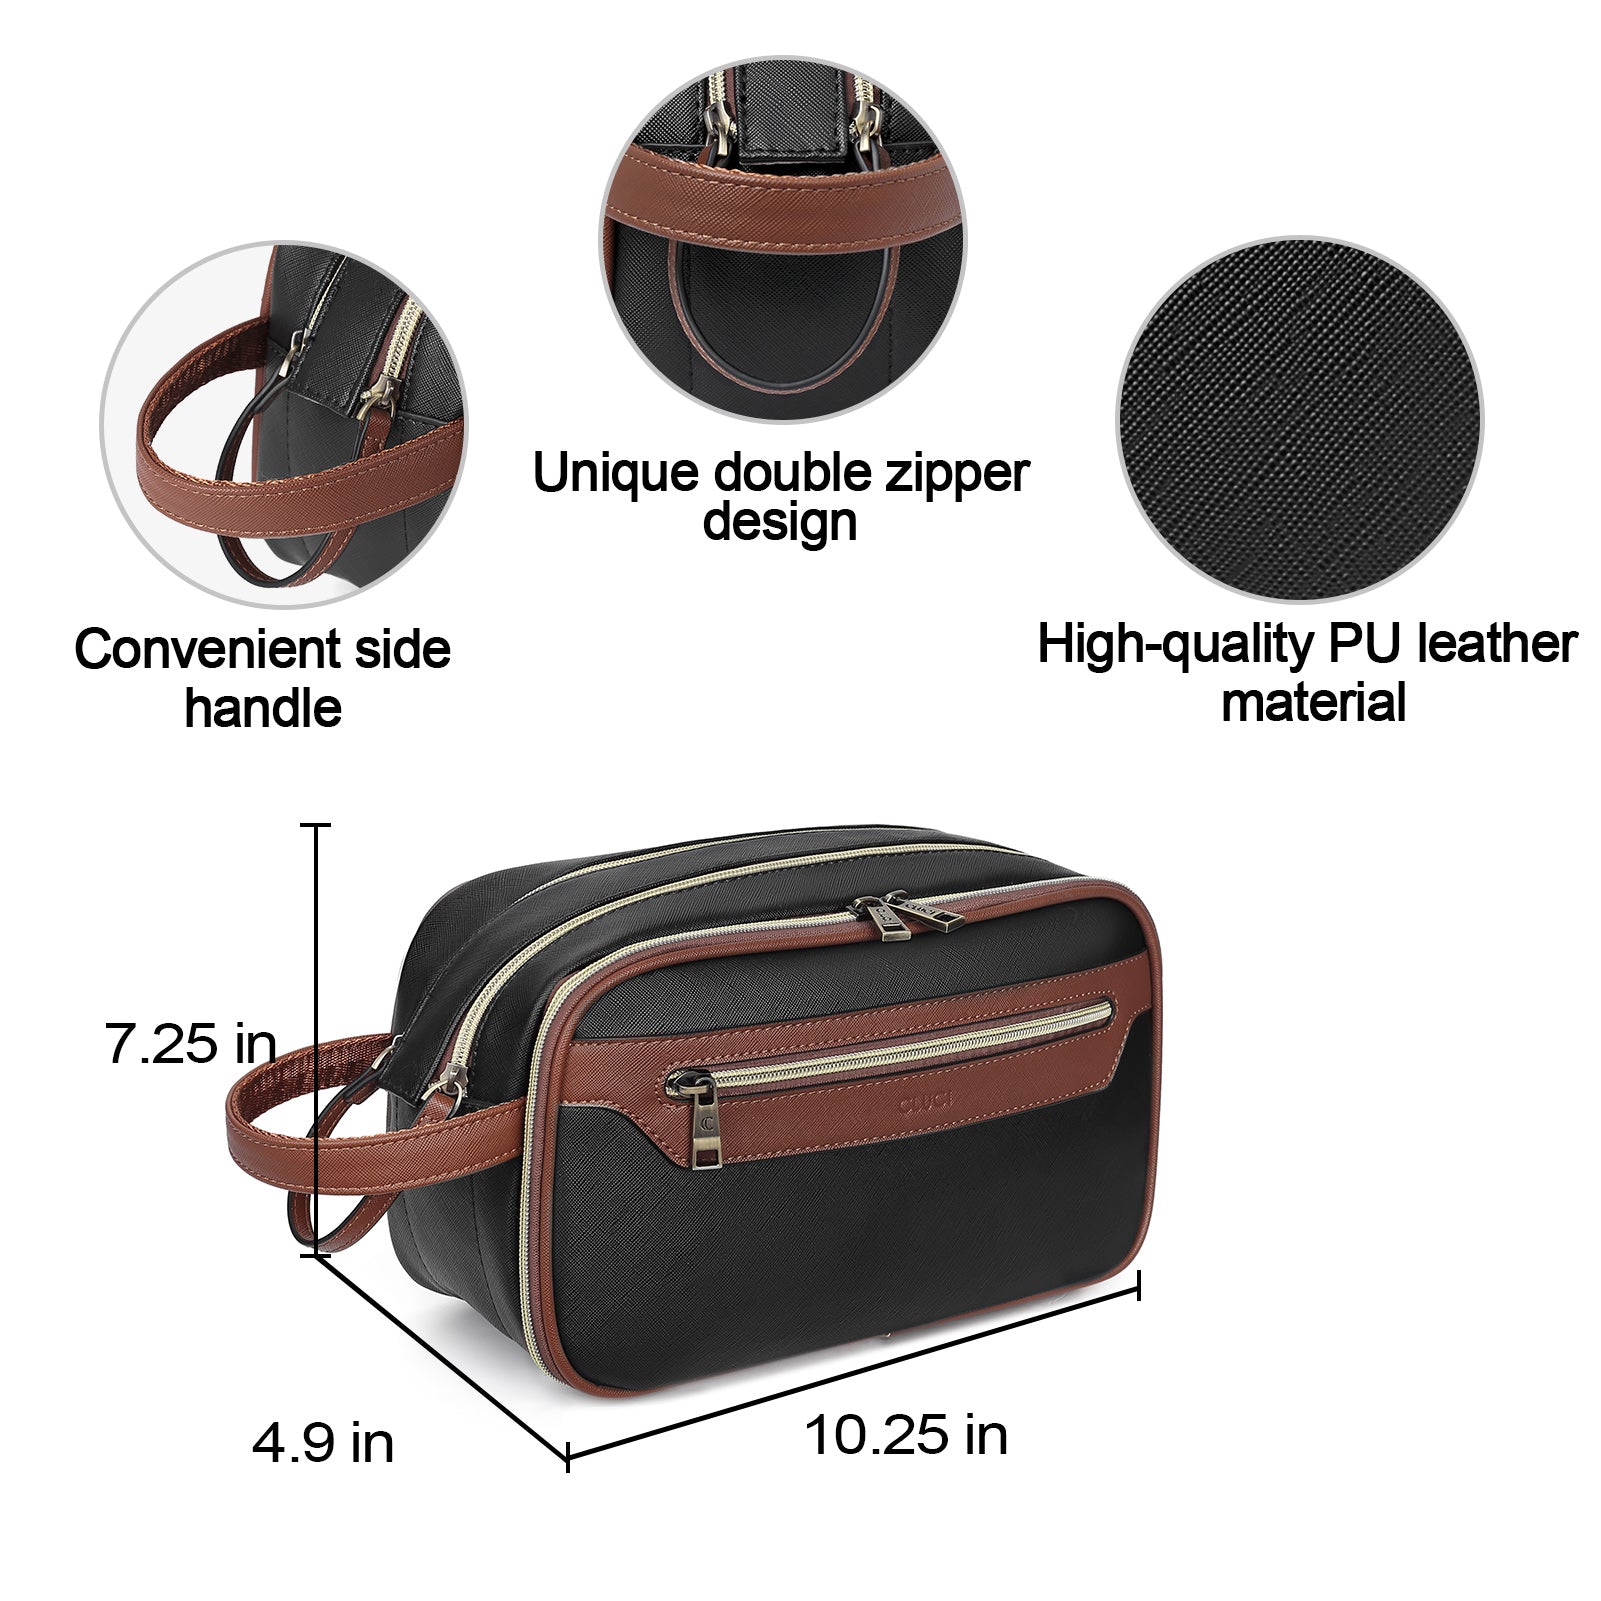 CLUCI Travel Toiletry Bag for Women/ Men, Water-resistant Shaving Bag for Toiletries Accessories with Divider and Handle for Cosmetics Toiletries Brushes Tools